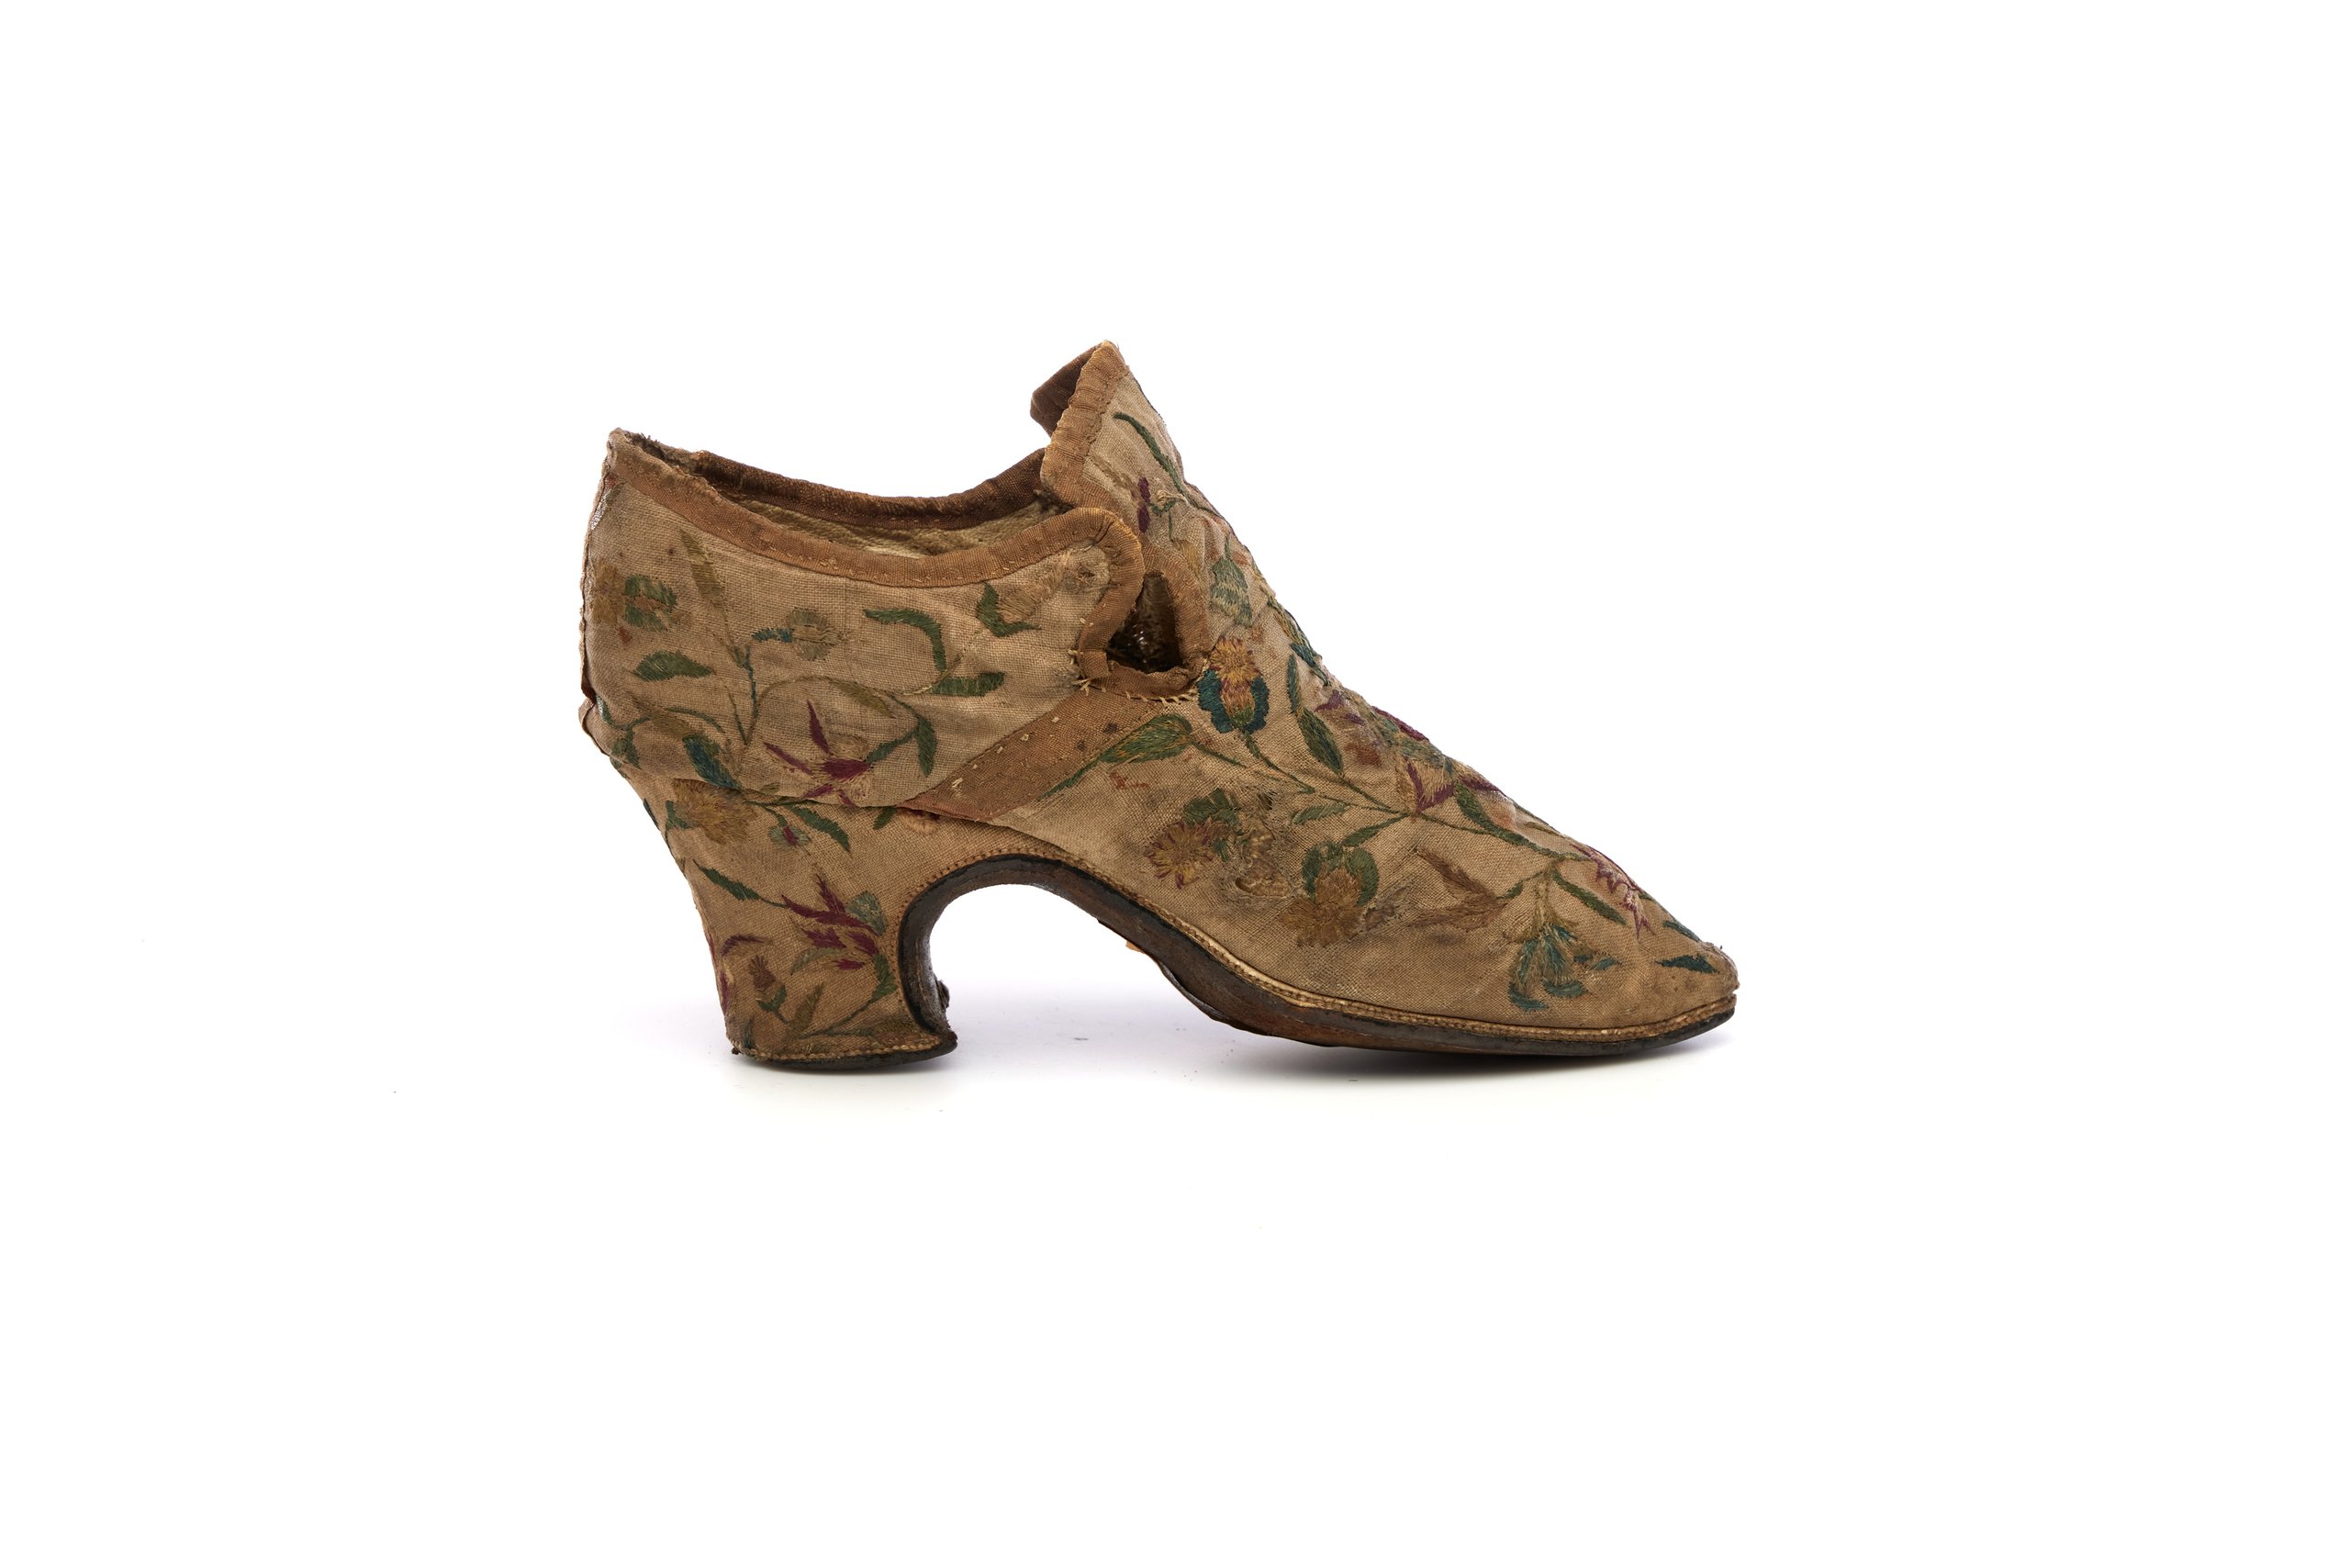 Pair of tie shoes from the Joseph Box collection